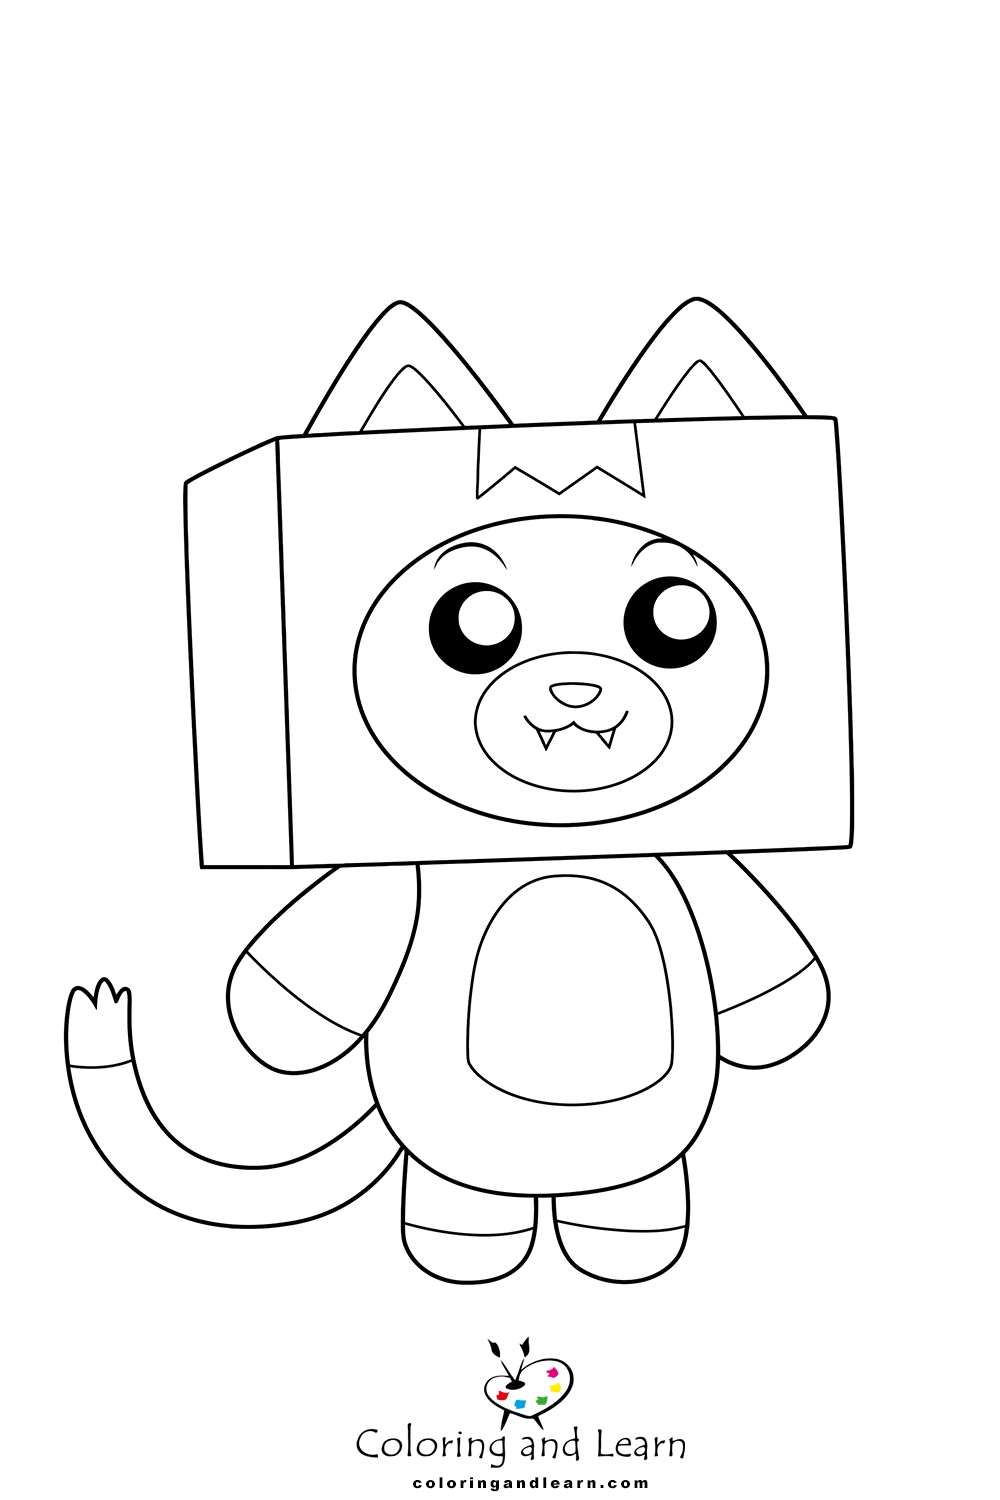 Lankybox coloring pages